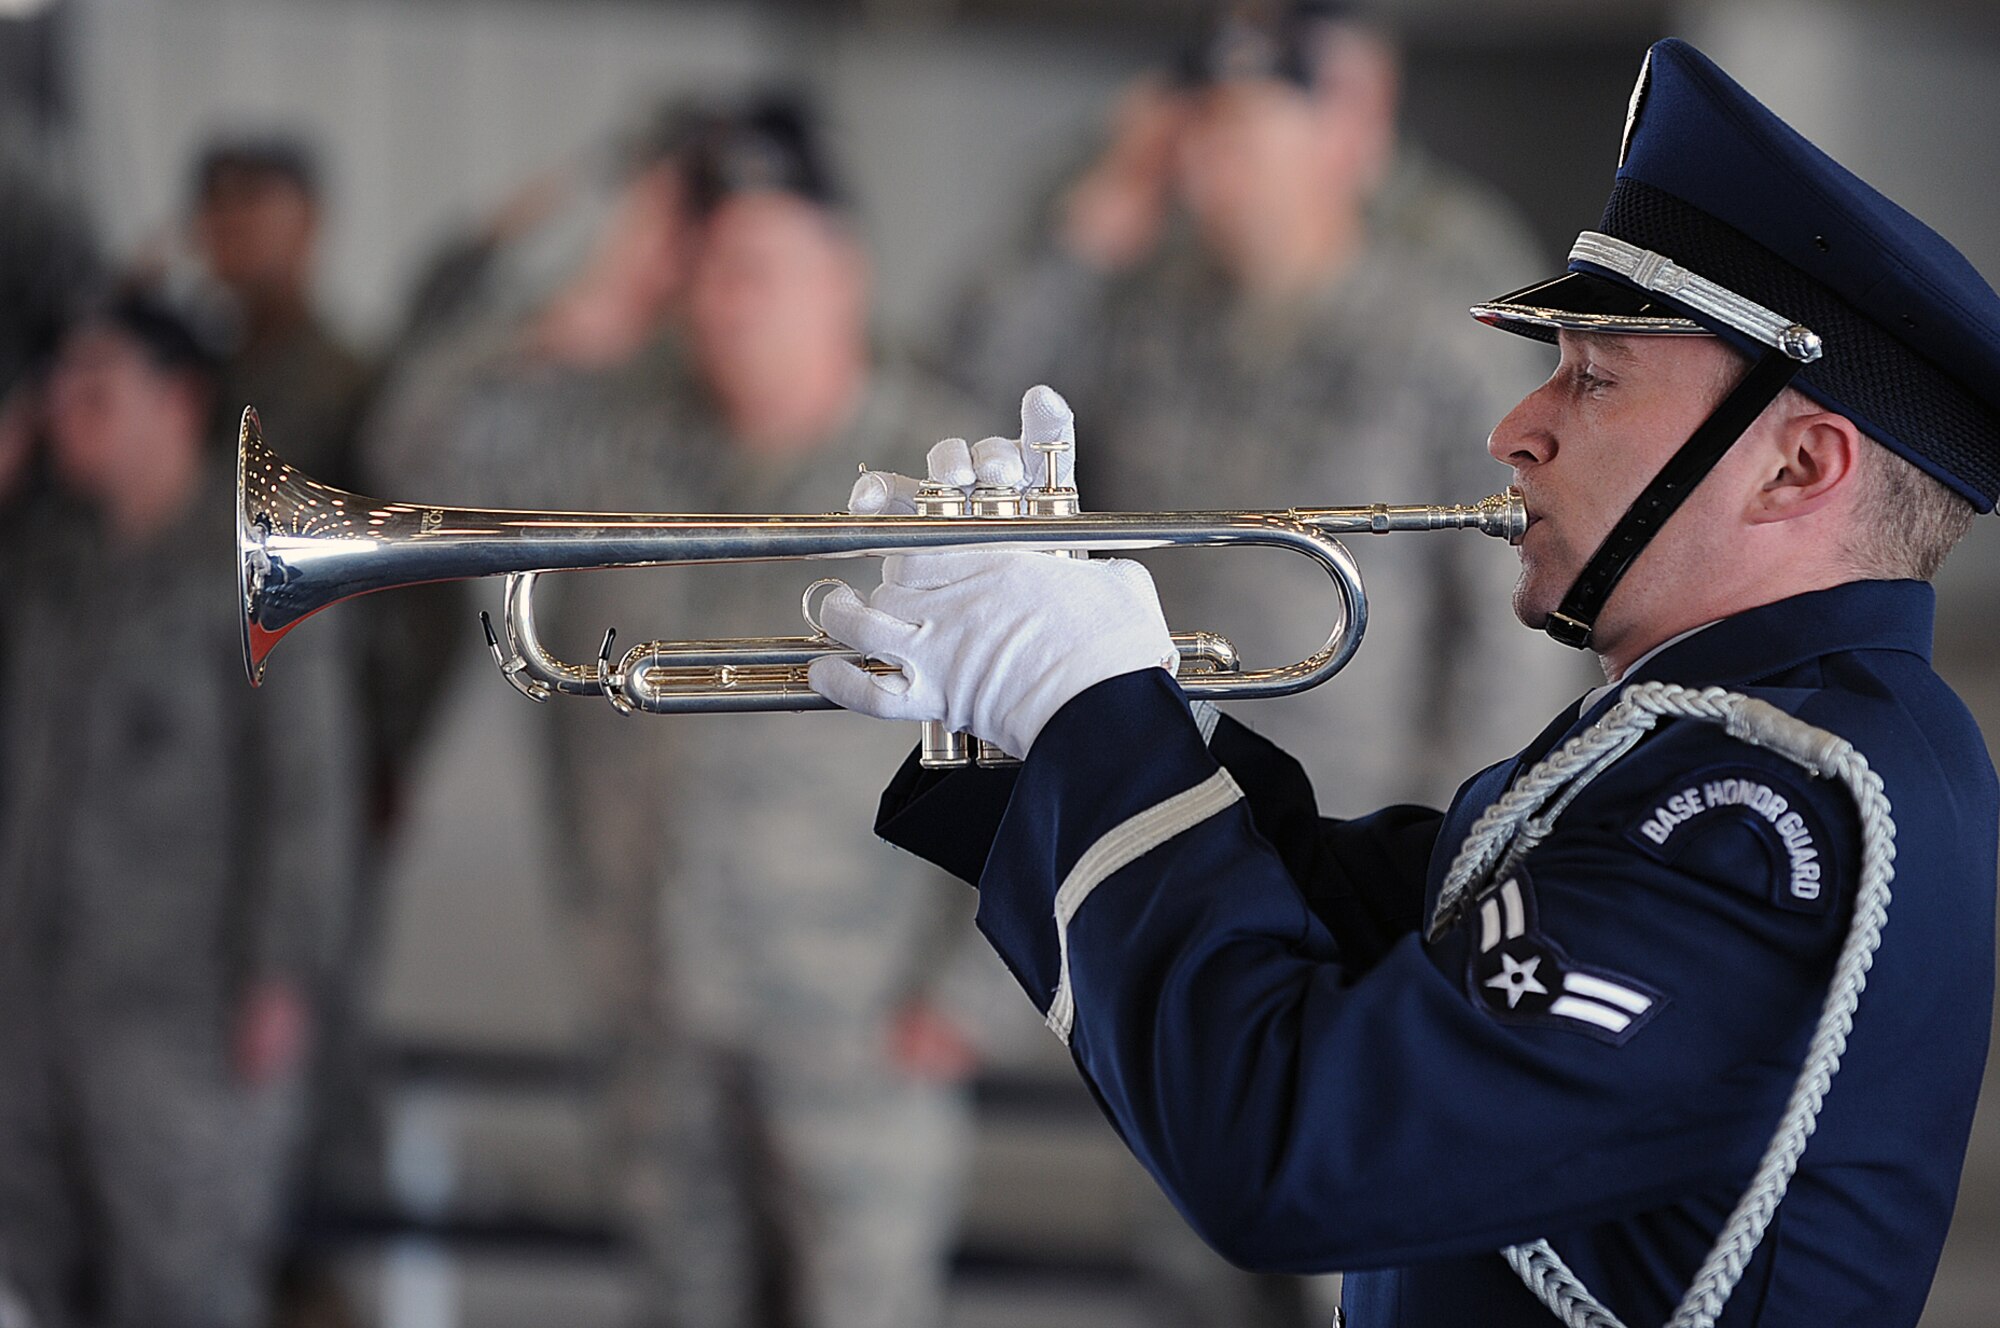 Airman 1st Class David Bailey, 28th Force Support Squadron promotions apprentice, plays “Taps” in honor of fallen police officers during a National Police Week retreat here, May 13. National Police Week has honored local, state, and federal fallen officers for 46 years.  (U.S. Air Force photo/Airman 1st Class Joshua J. Seybert)